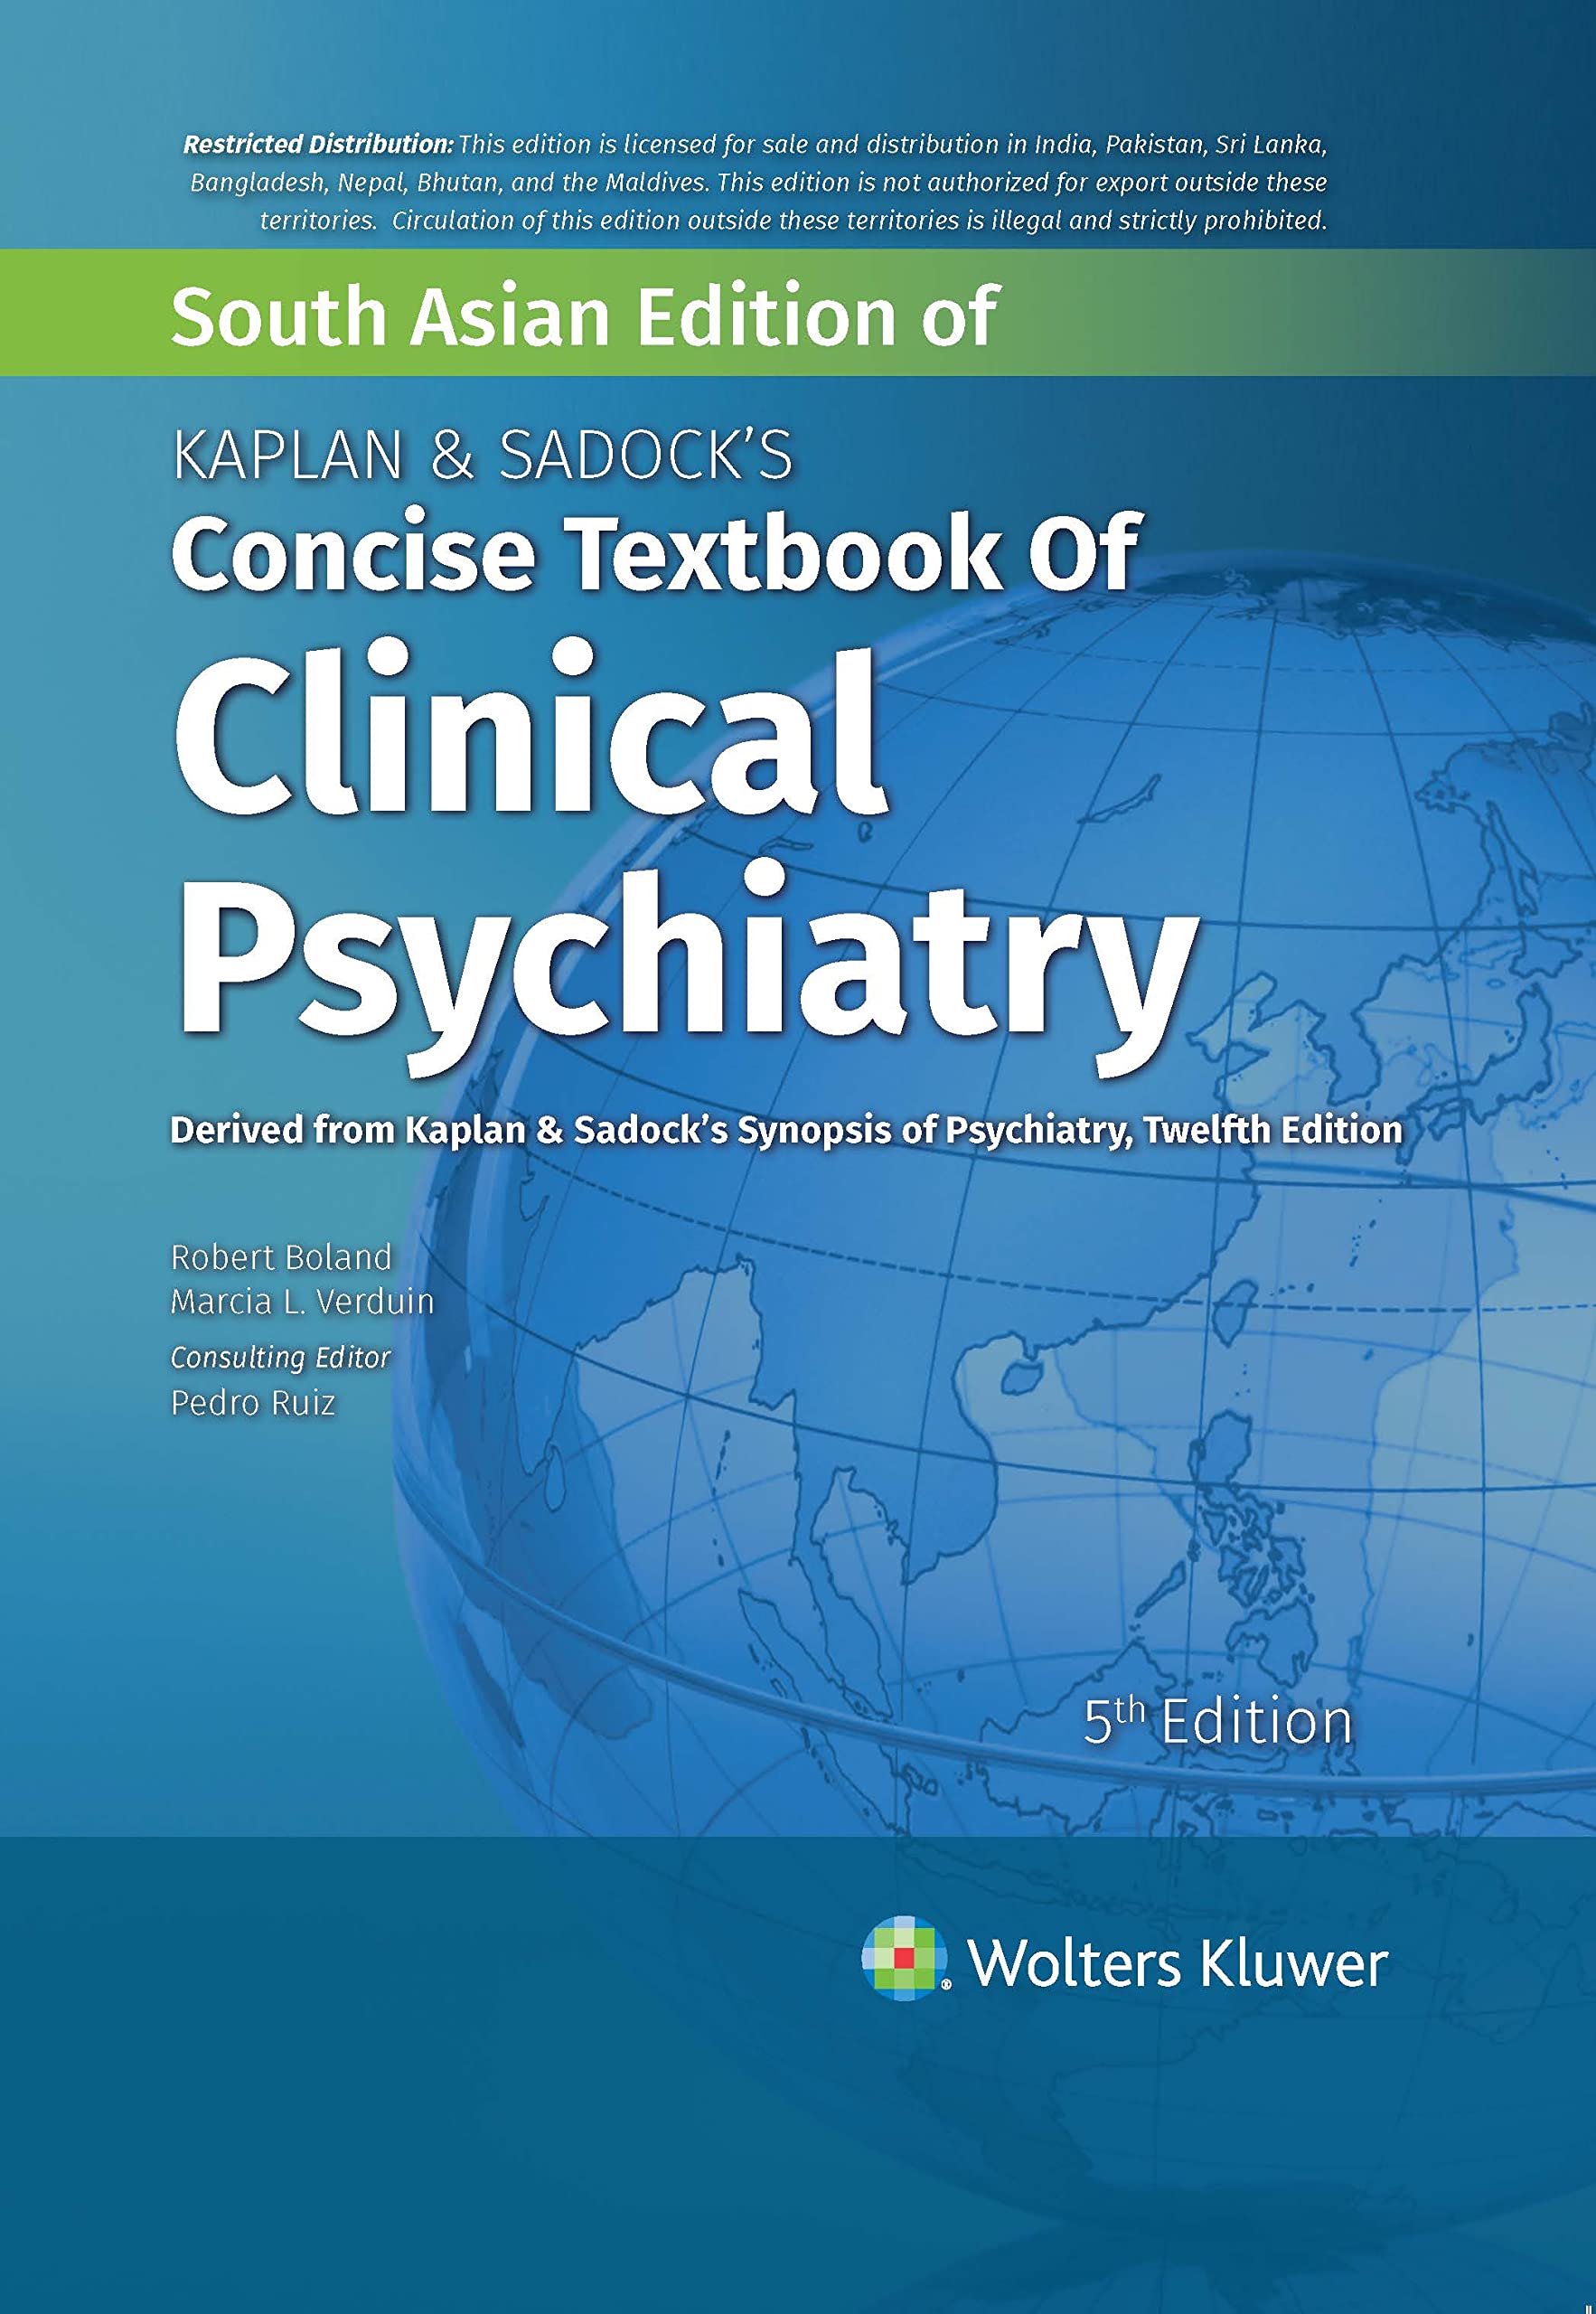 Kaplan & Sadock's Concise Textbook of Clinical Psychiatry, 1st edition